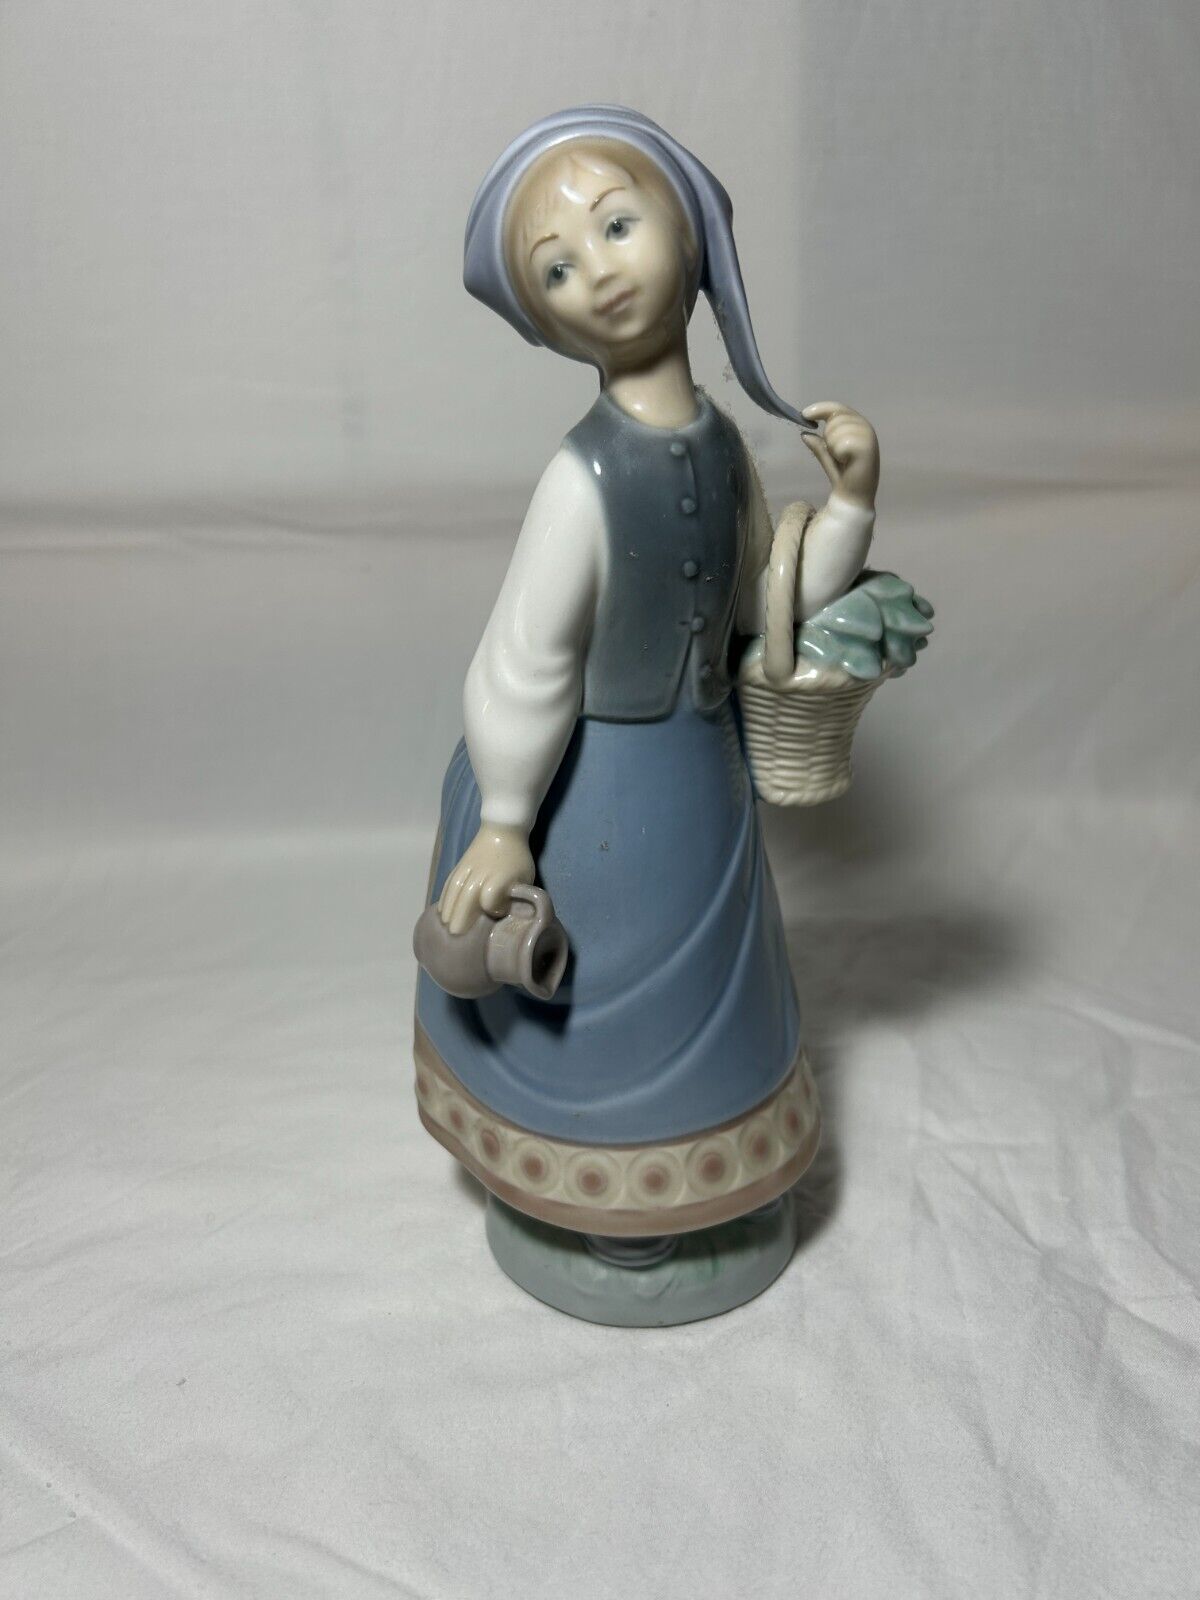 NEW, MINT, RARE, RETIRED, Lladro #5024 “Woman With Scarf” Glazed. CRV $415.00